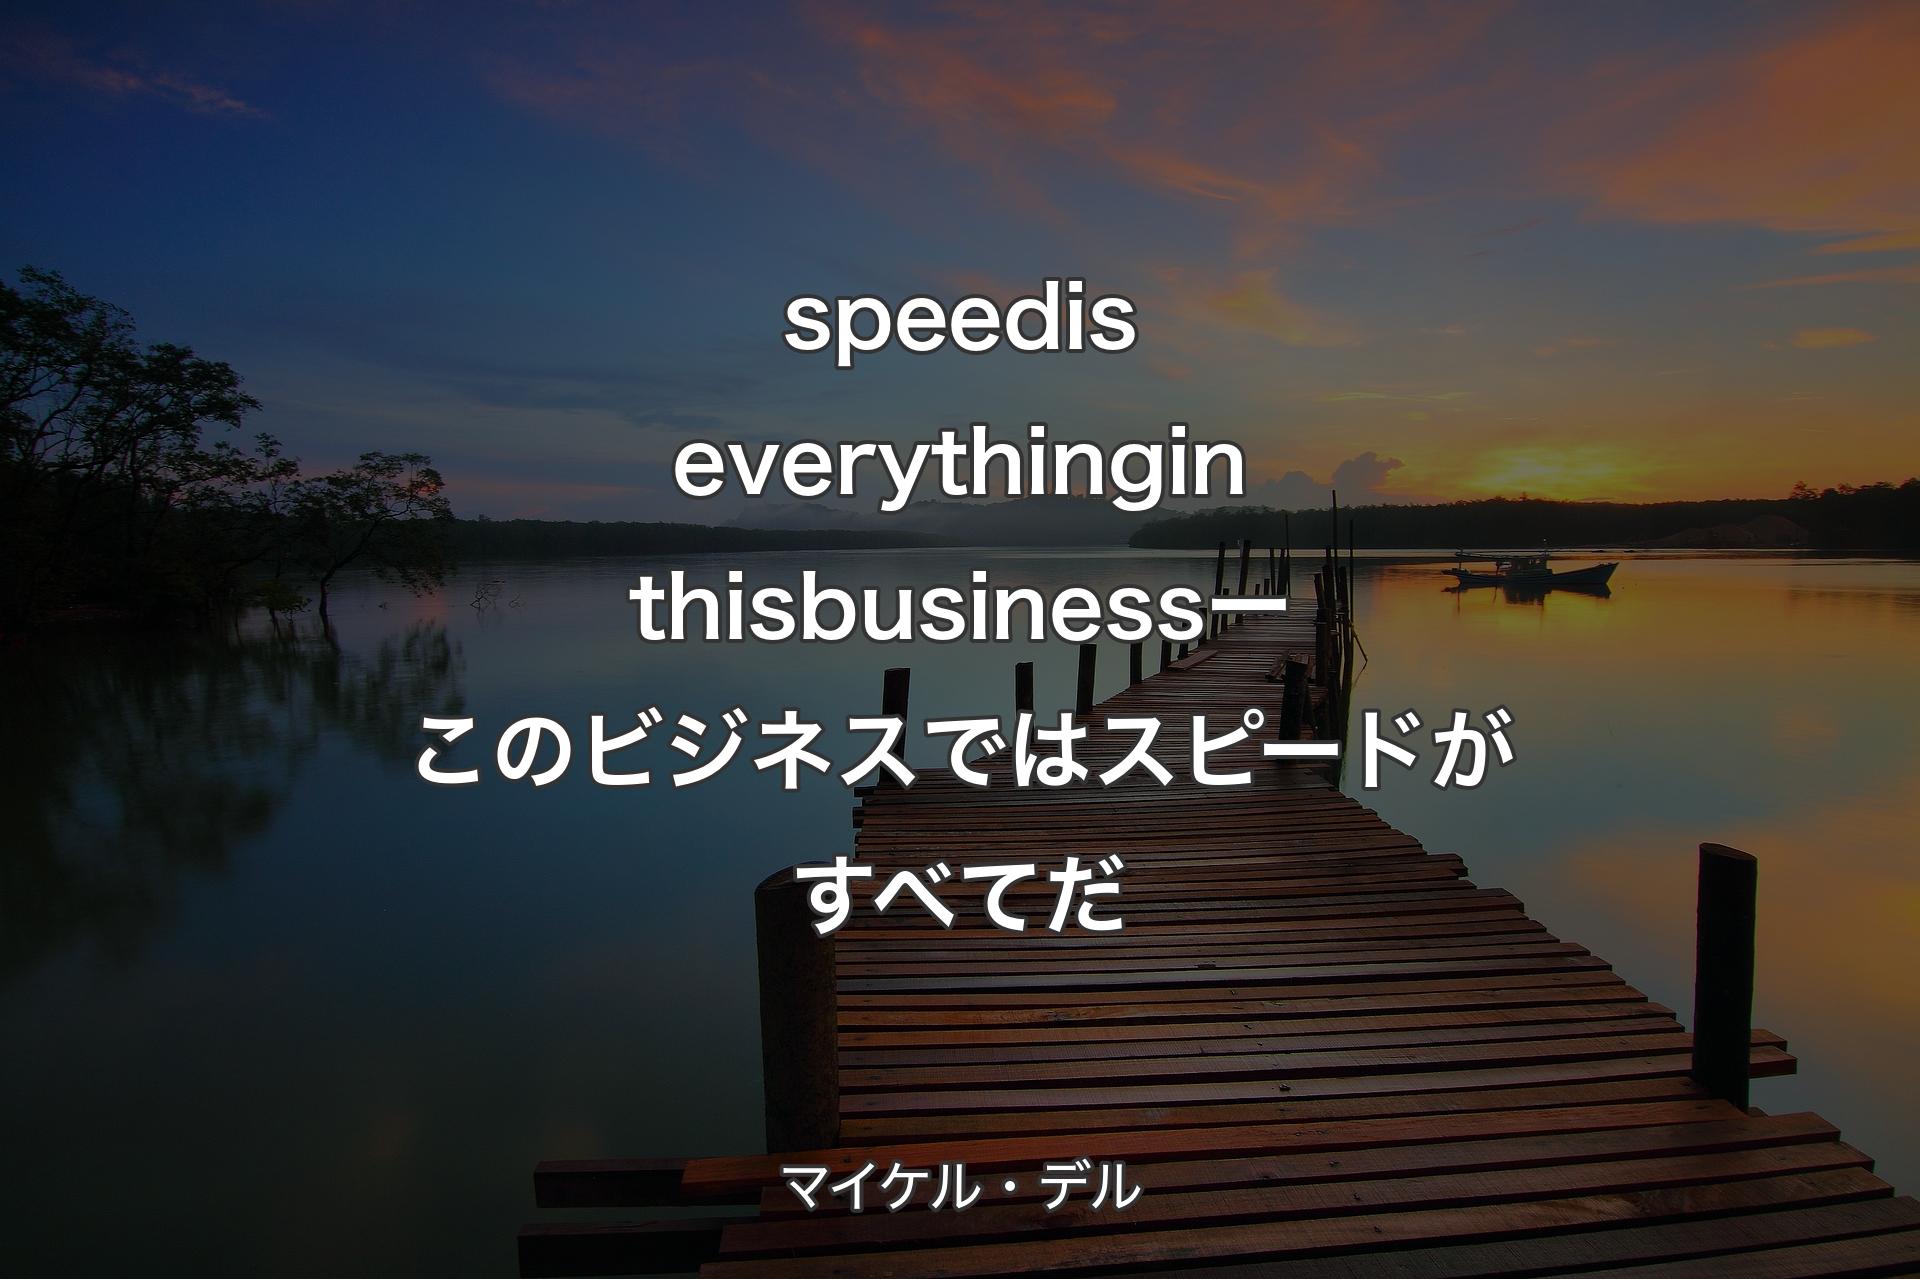 speed is everything in this business ー このビジネスではスピードがすべてだ - マイケル・デル